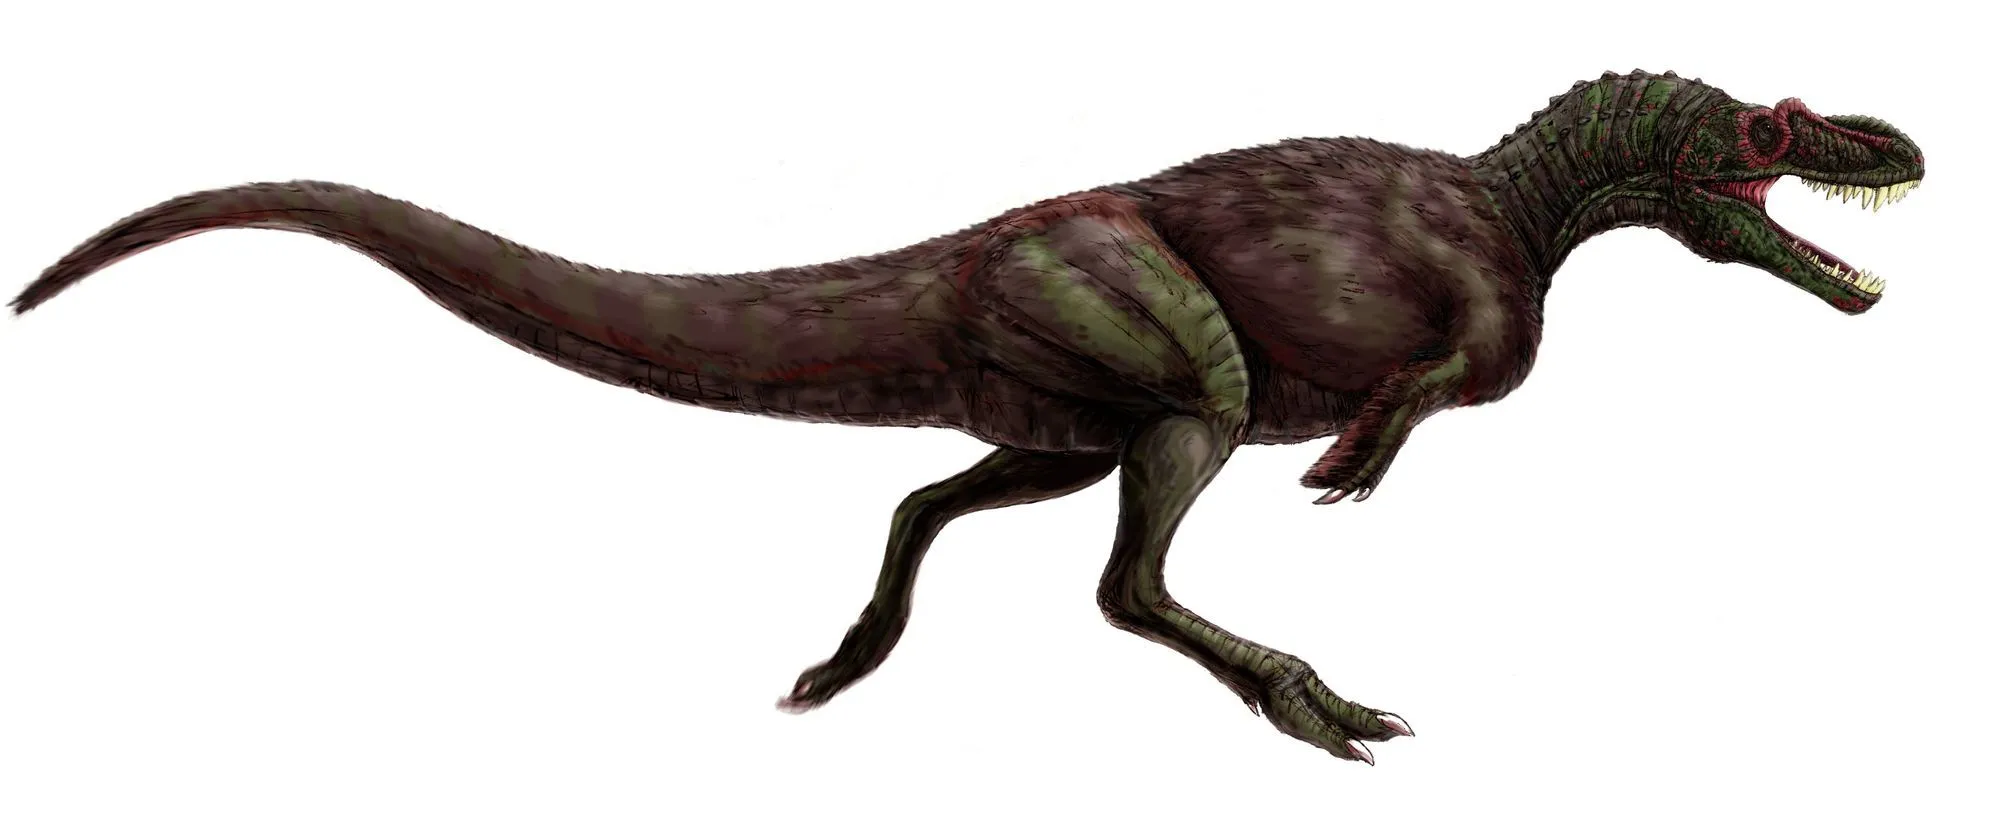 One of the interesting Appalachiosaurus facts is that it was a bipedal predator with small arms.